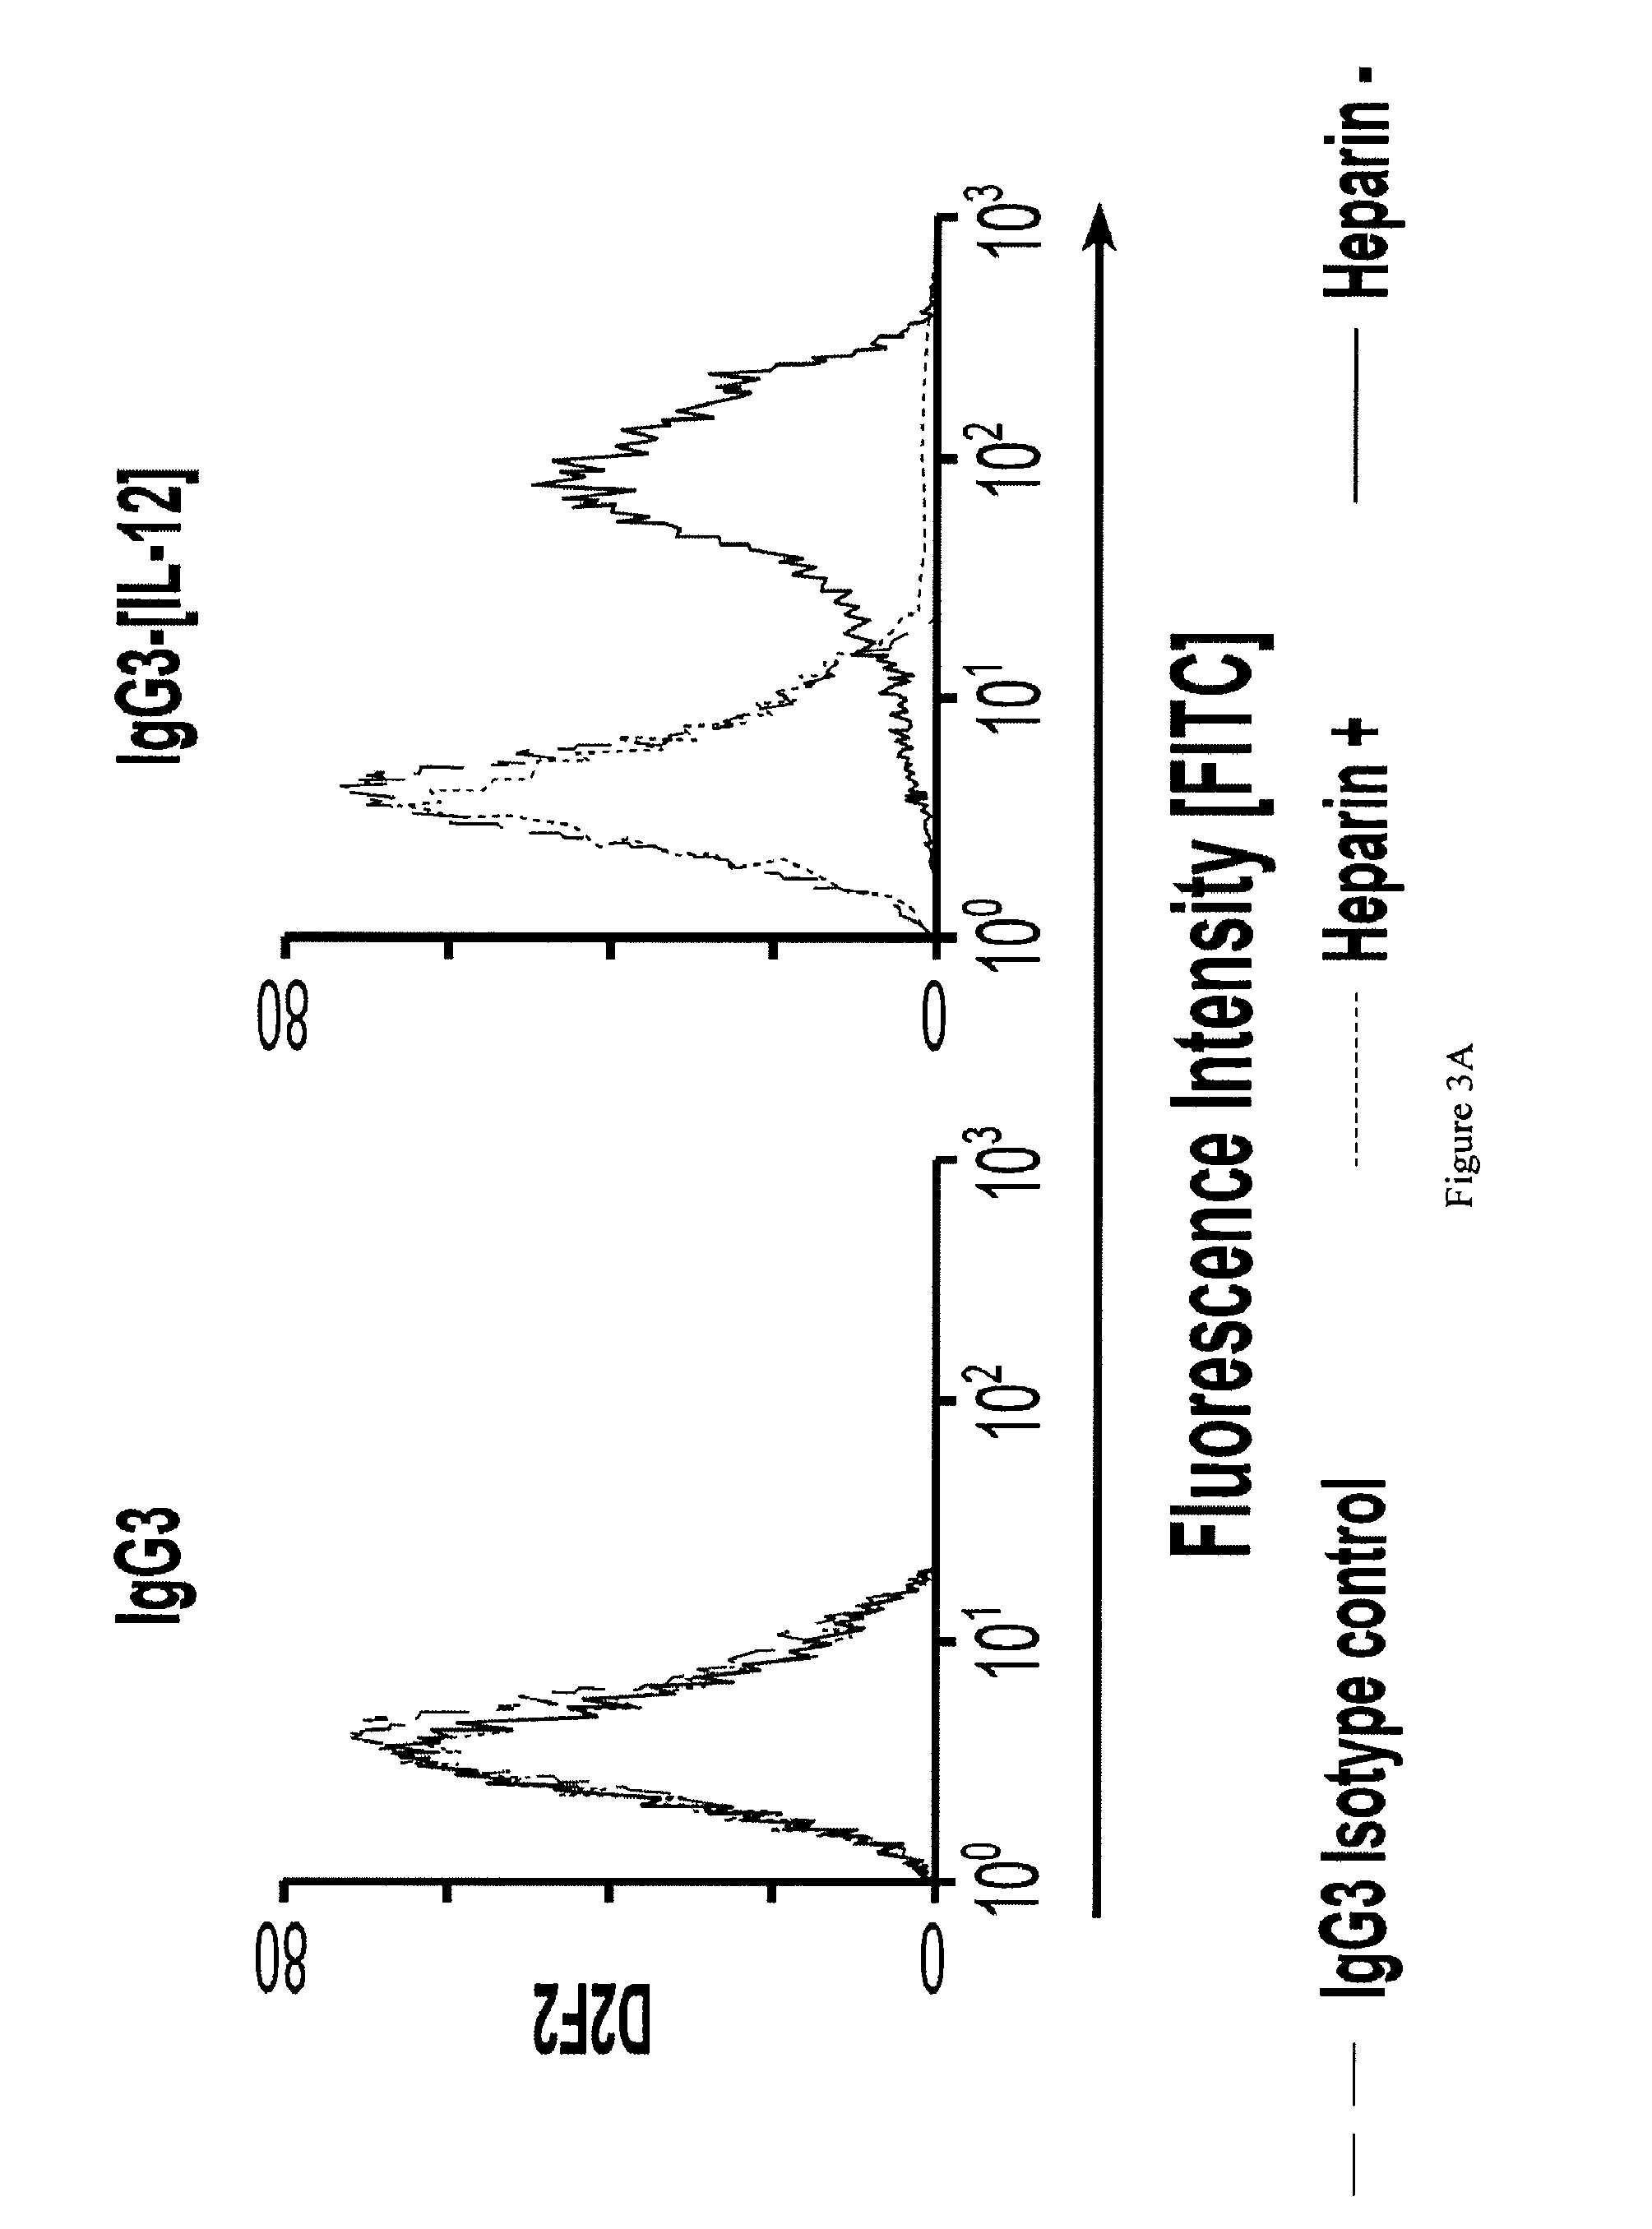 Antibody fusion with IL-12 proteins with disrupted heparin-binding activity